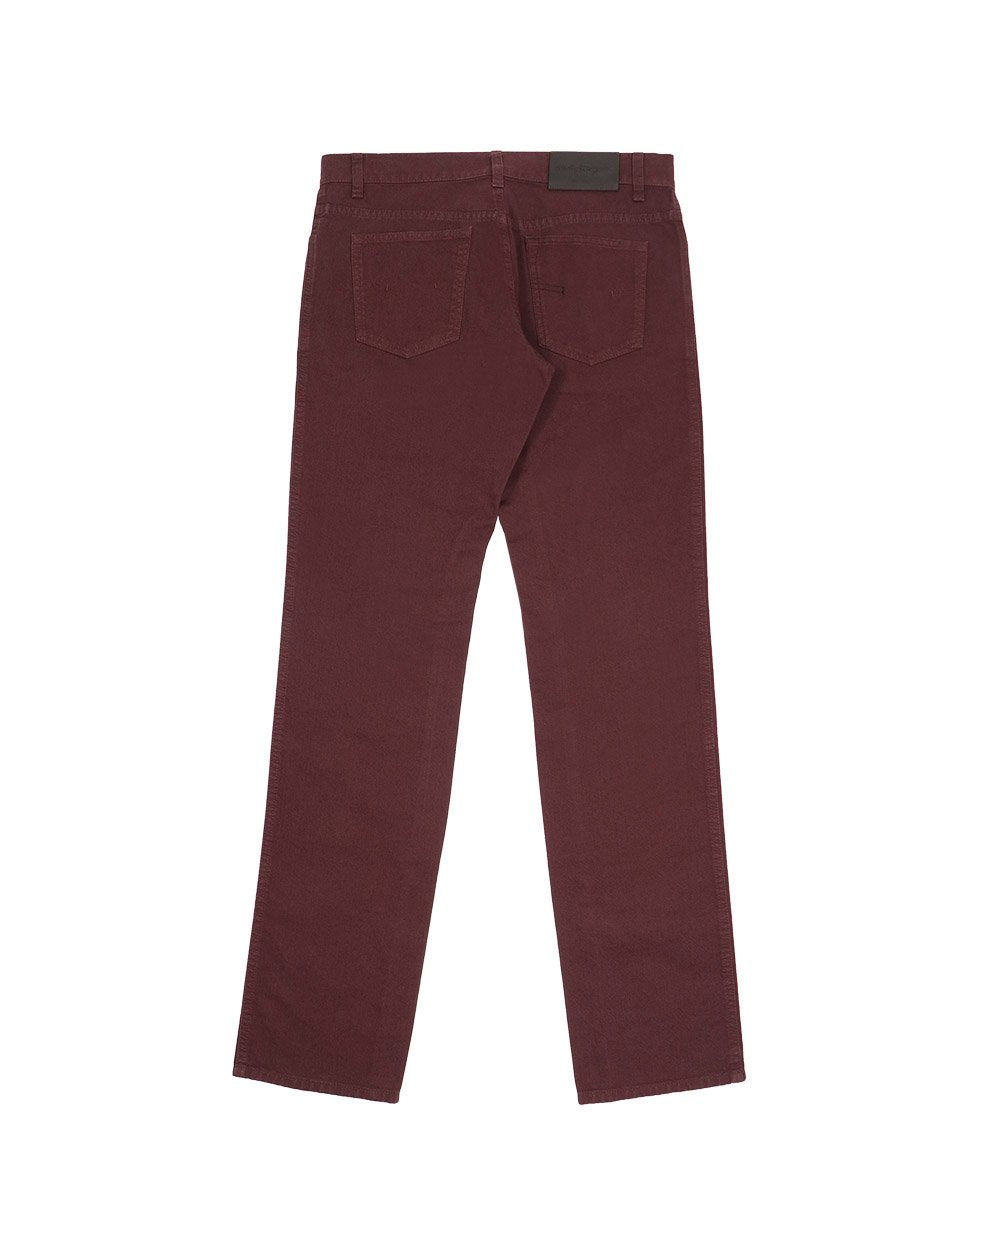 Cotton Jeans - ISSI Outlet